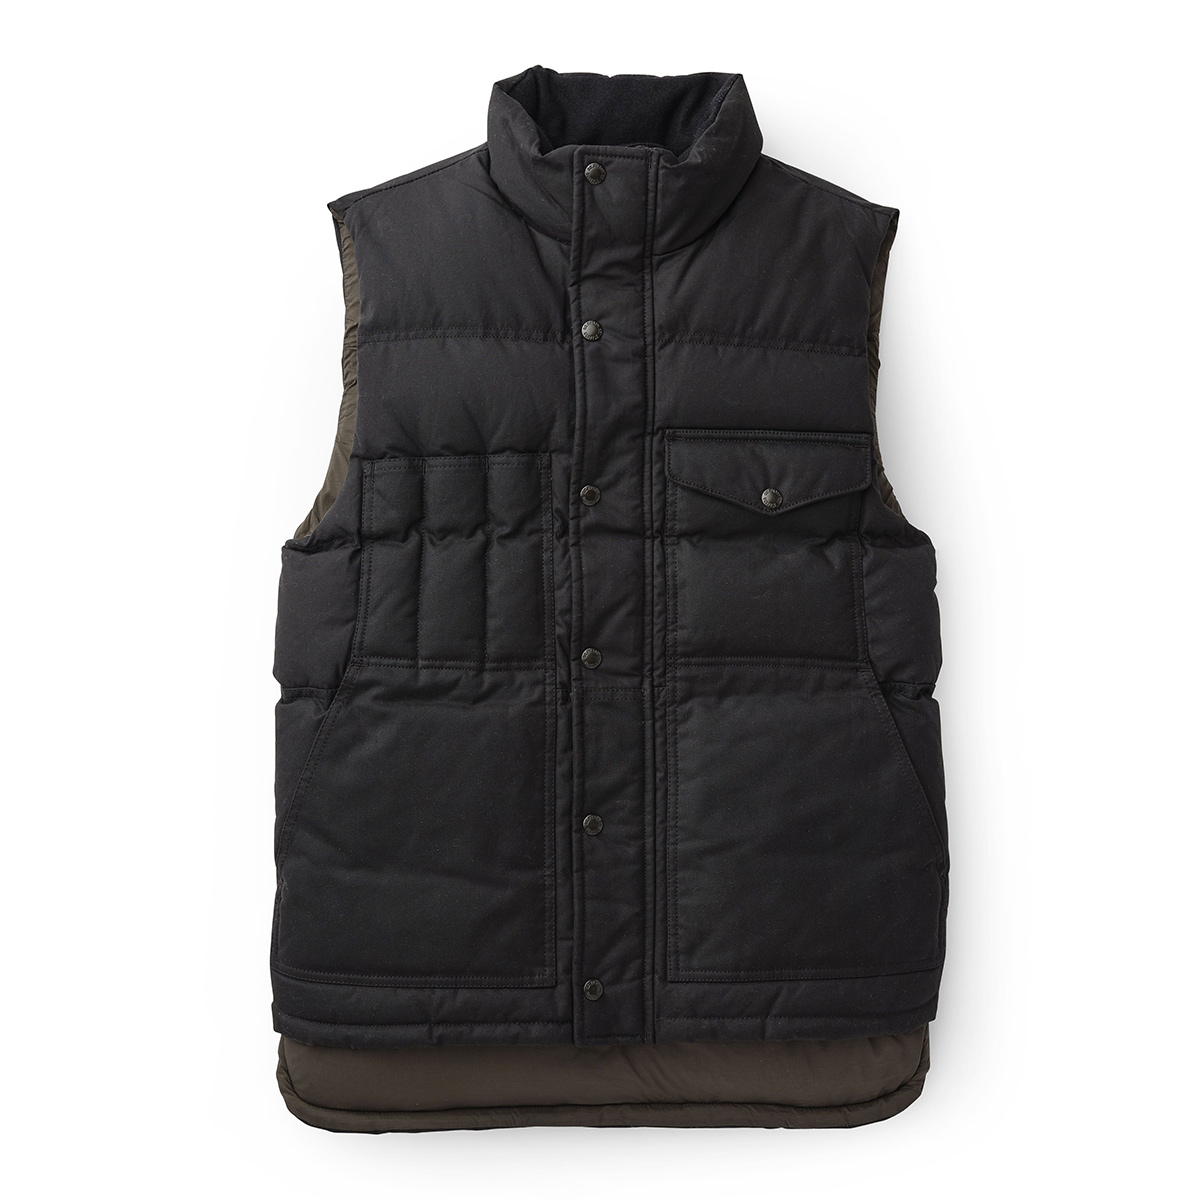 Filson Down Cruiser Vest Blue Coal, an exceptionally warm and